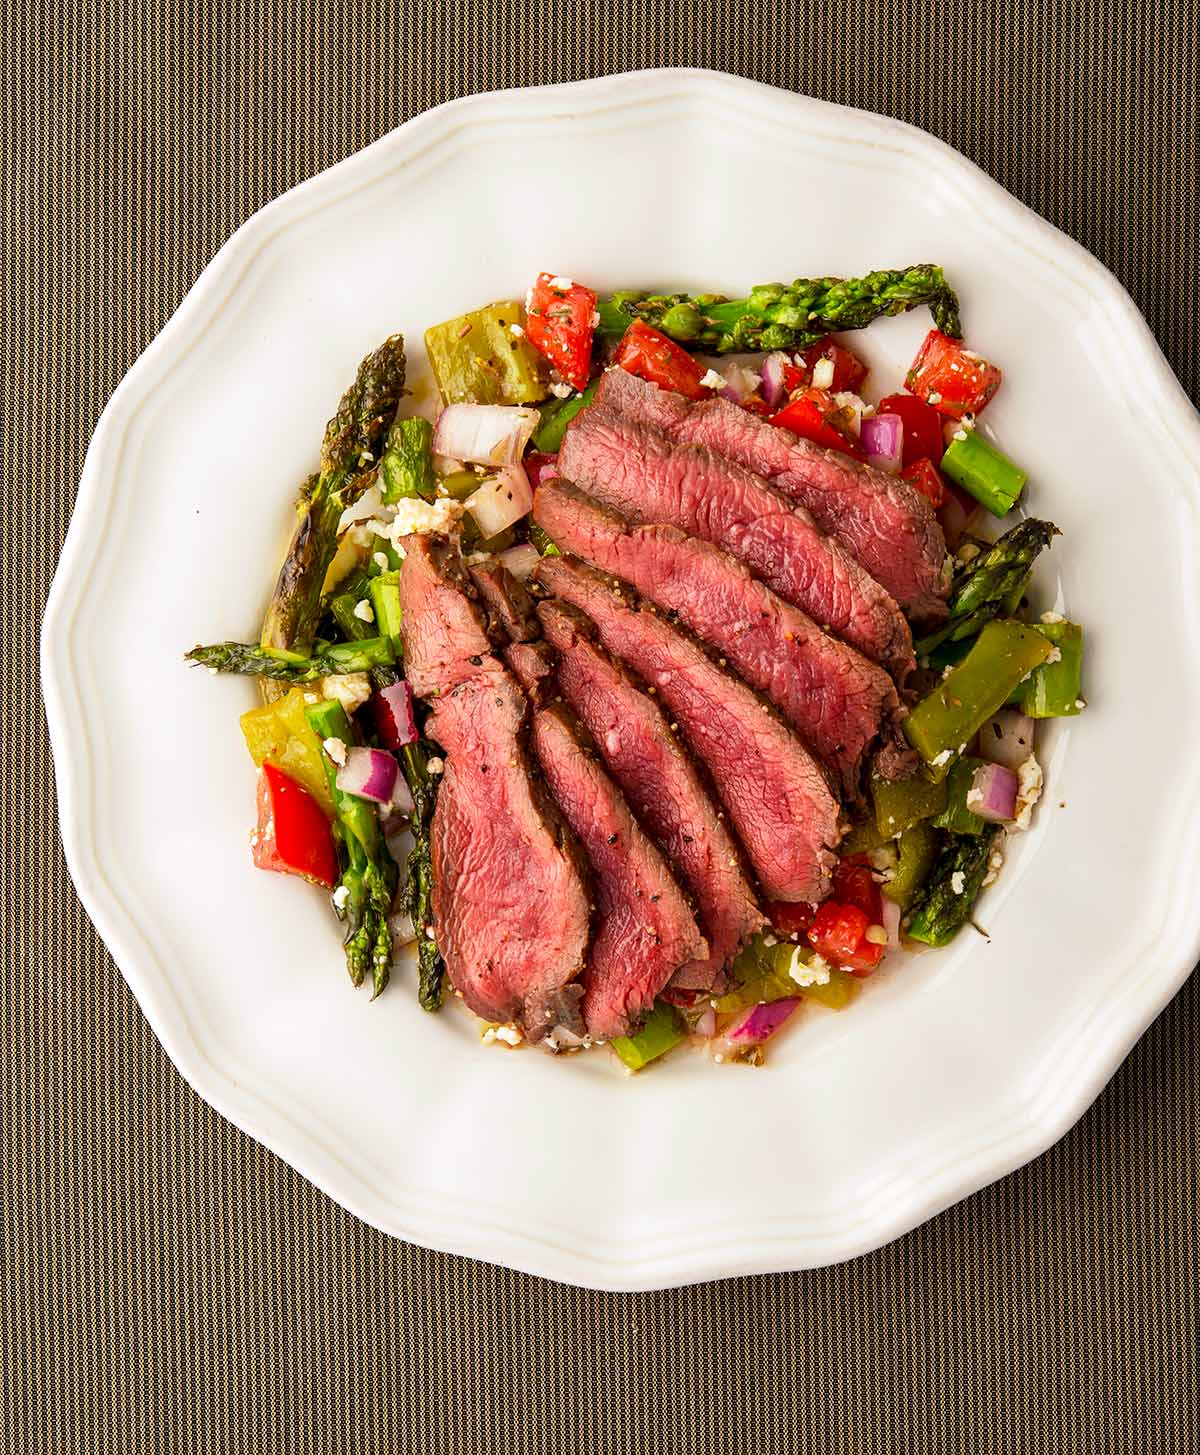 Grilled venison steak with a summer salad on a plate.